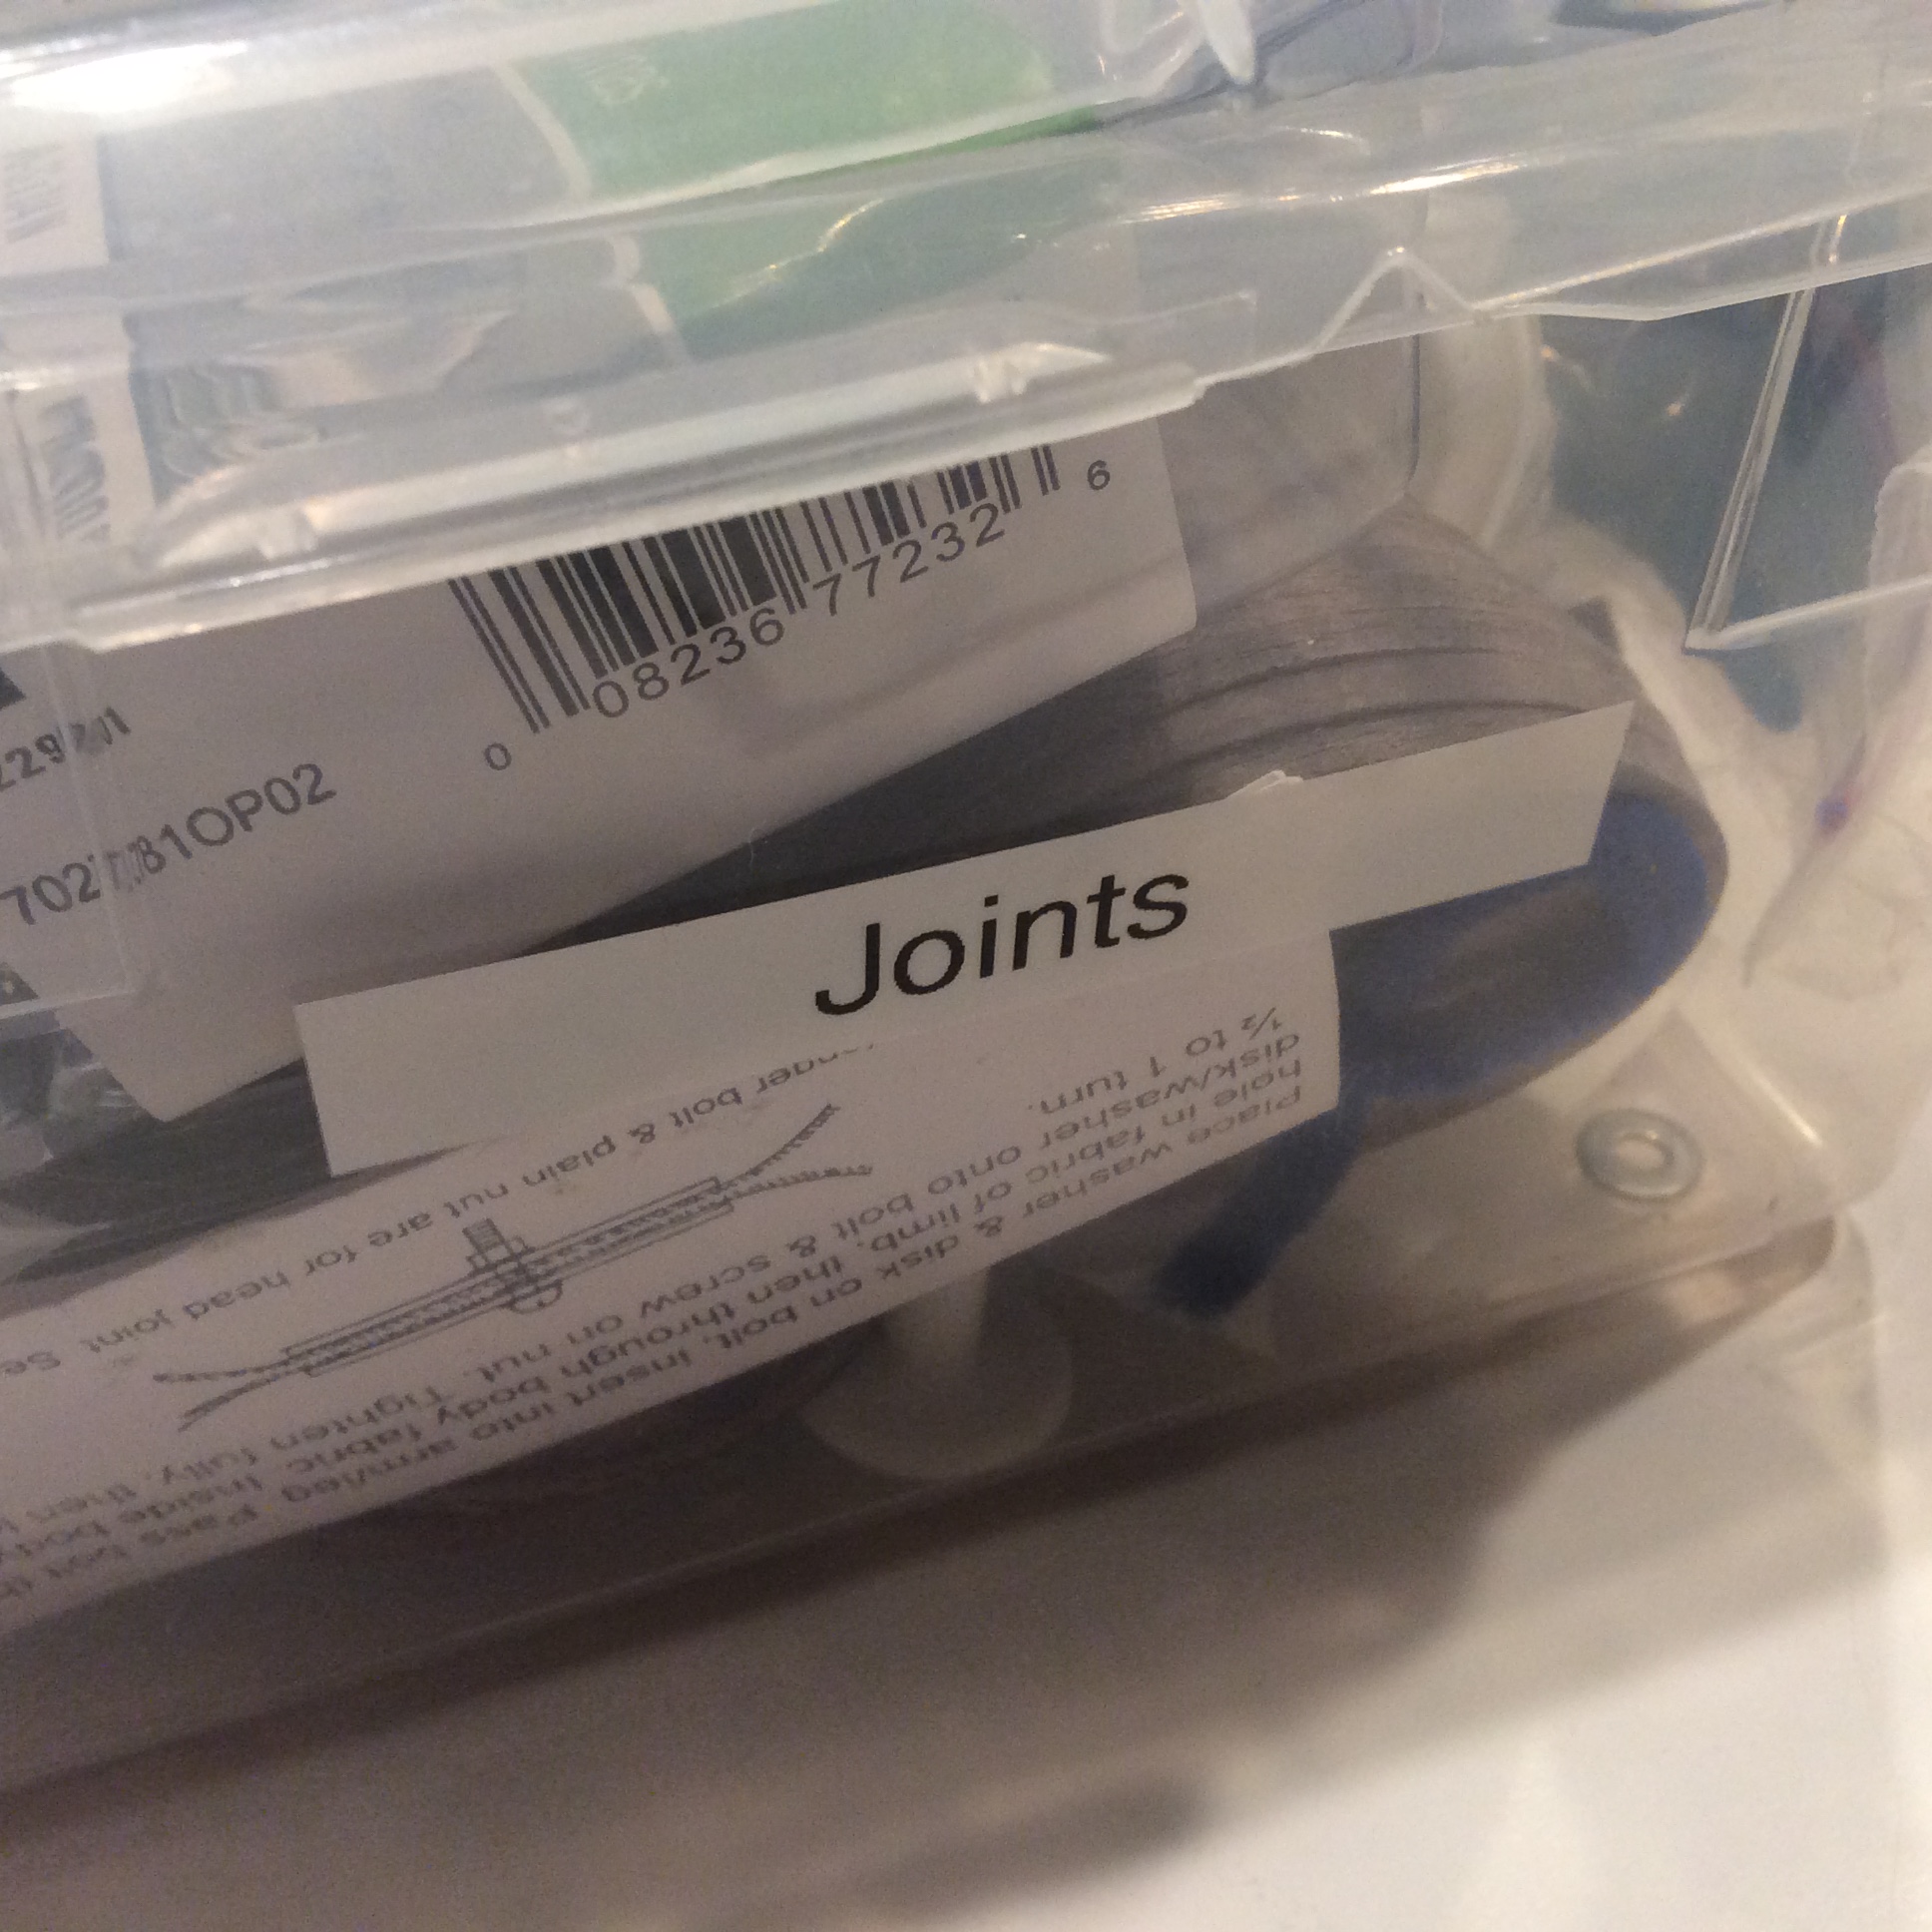 Shoebox labeled "Joints" containing doll/bear joints.